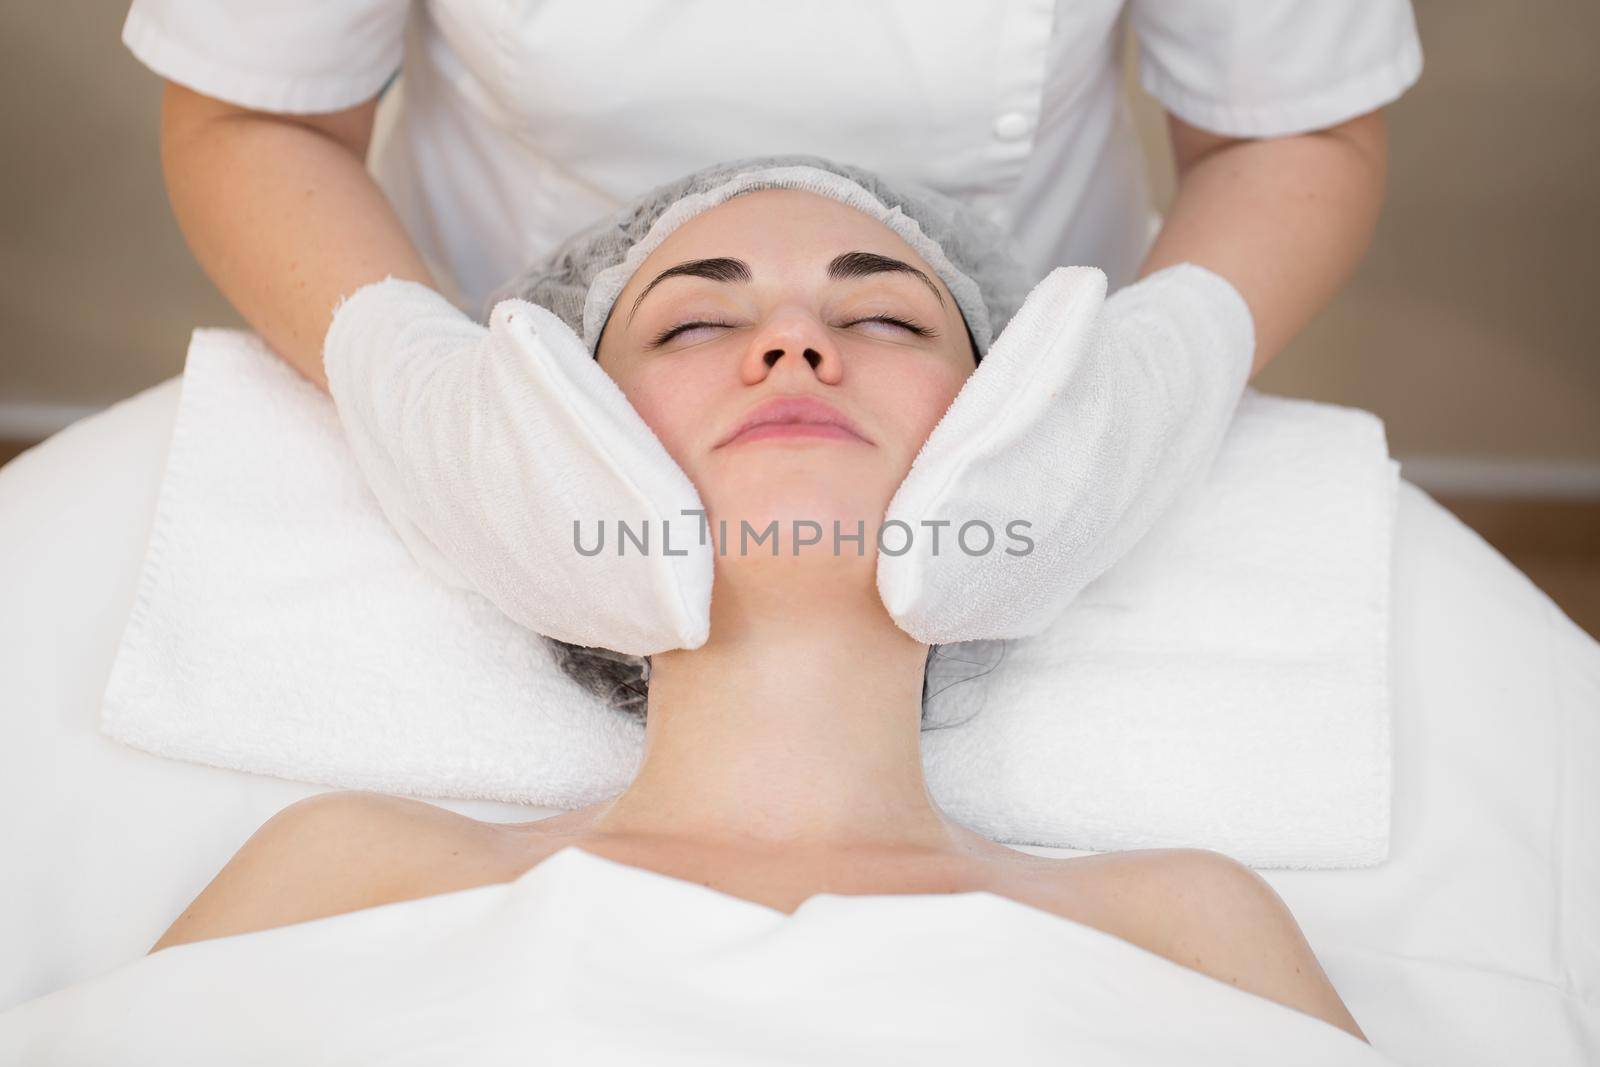 Hands of the beautician wipe the girl's face in the cosmetology center with white gloves. Portrait of a beautiful girl on the procedure for rejuvenating the face in a beauty salon. by StudioPeace